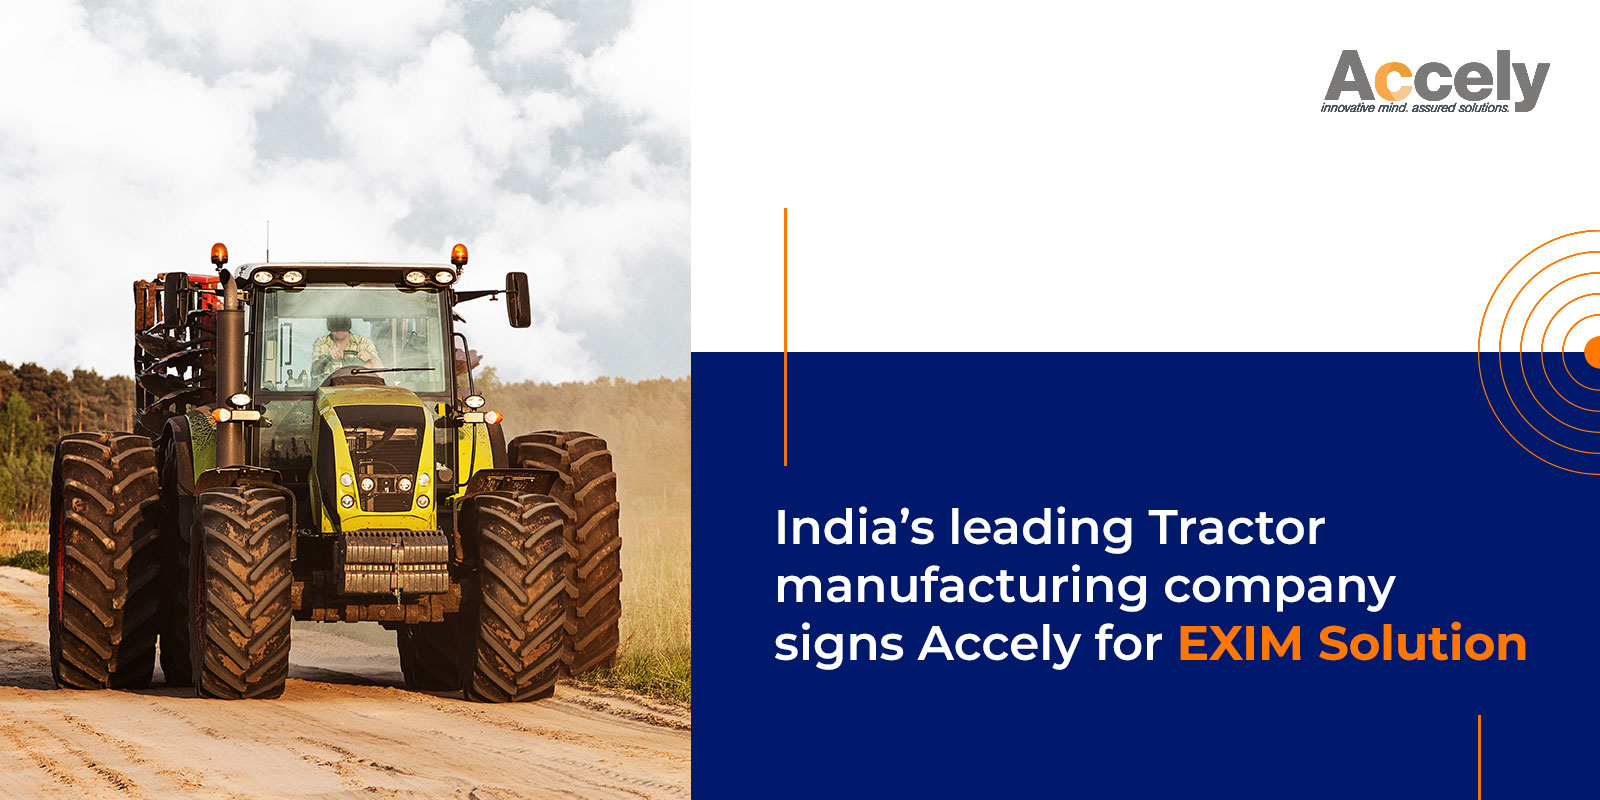 India’s leading Tractor manufacturing company signs Accely for EXIM Solution